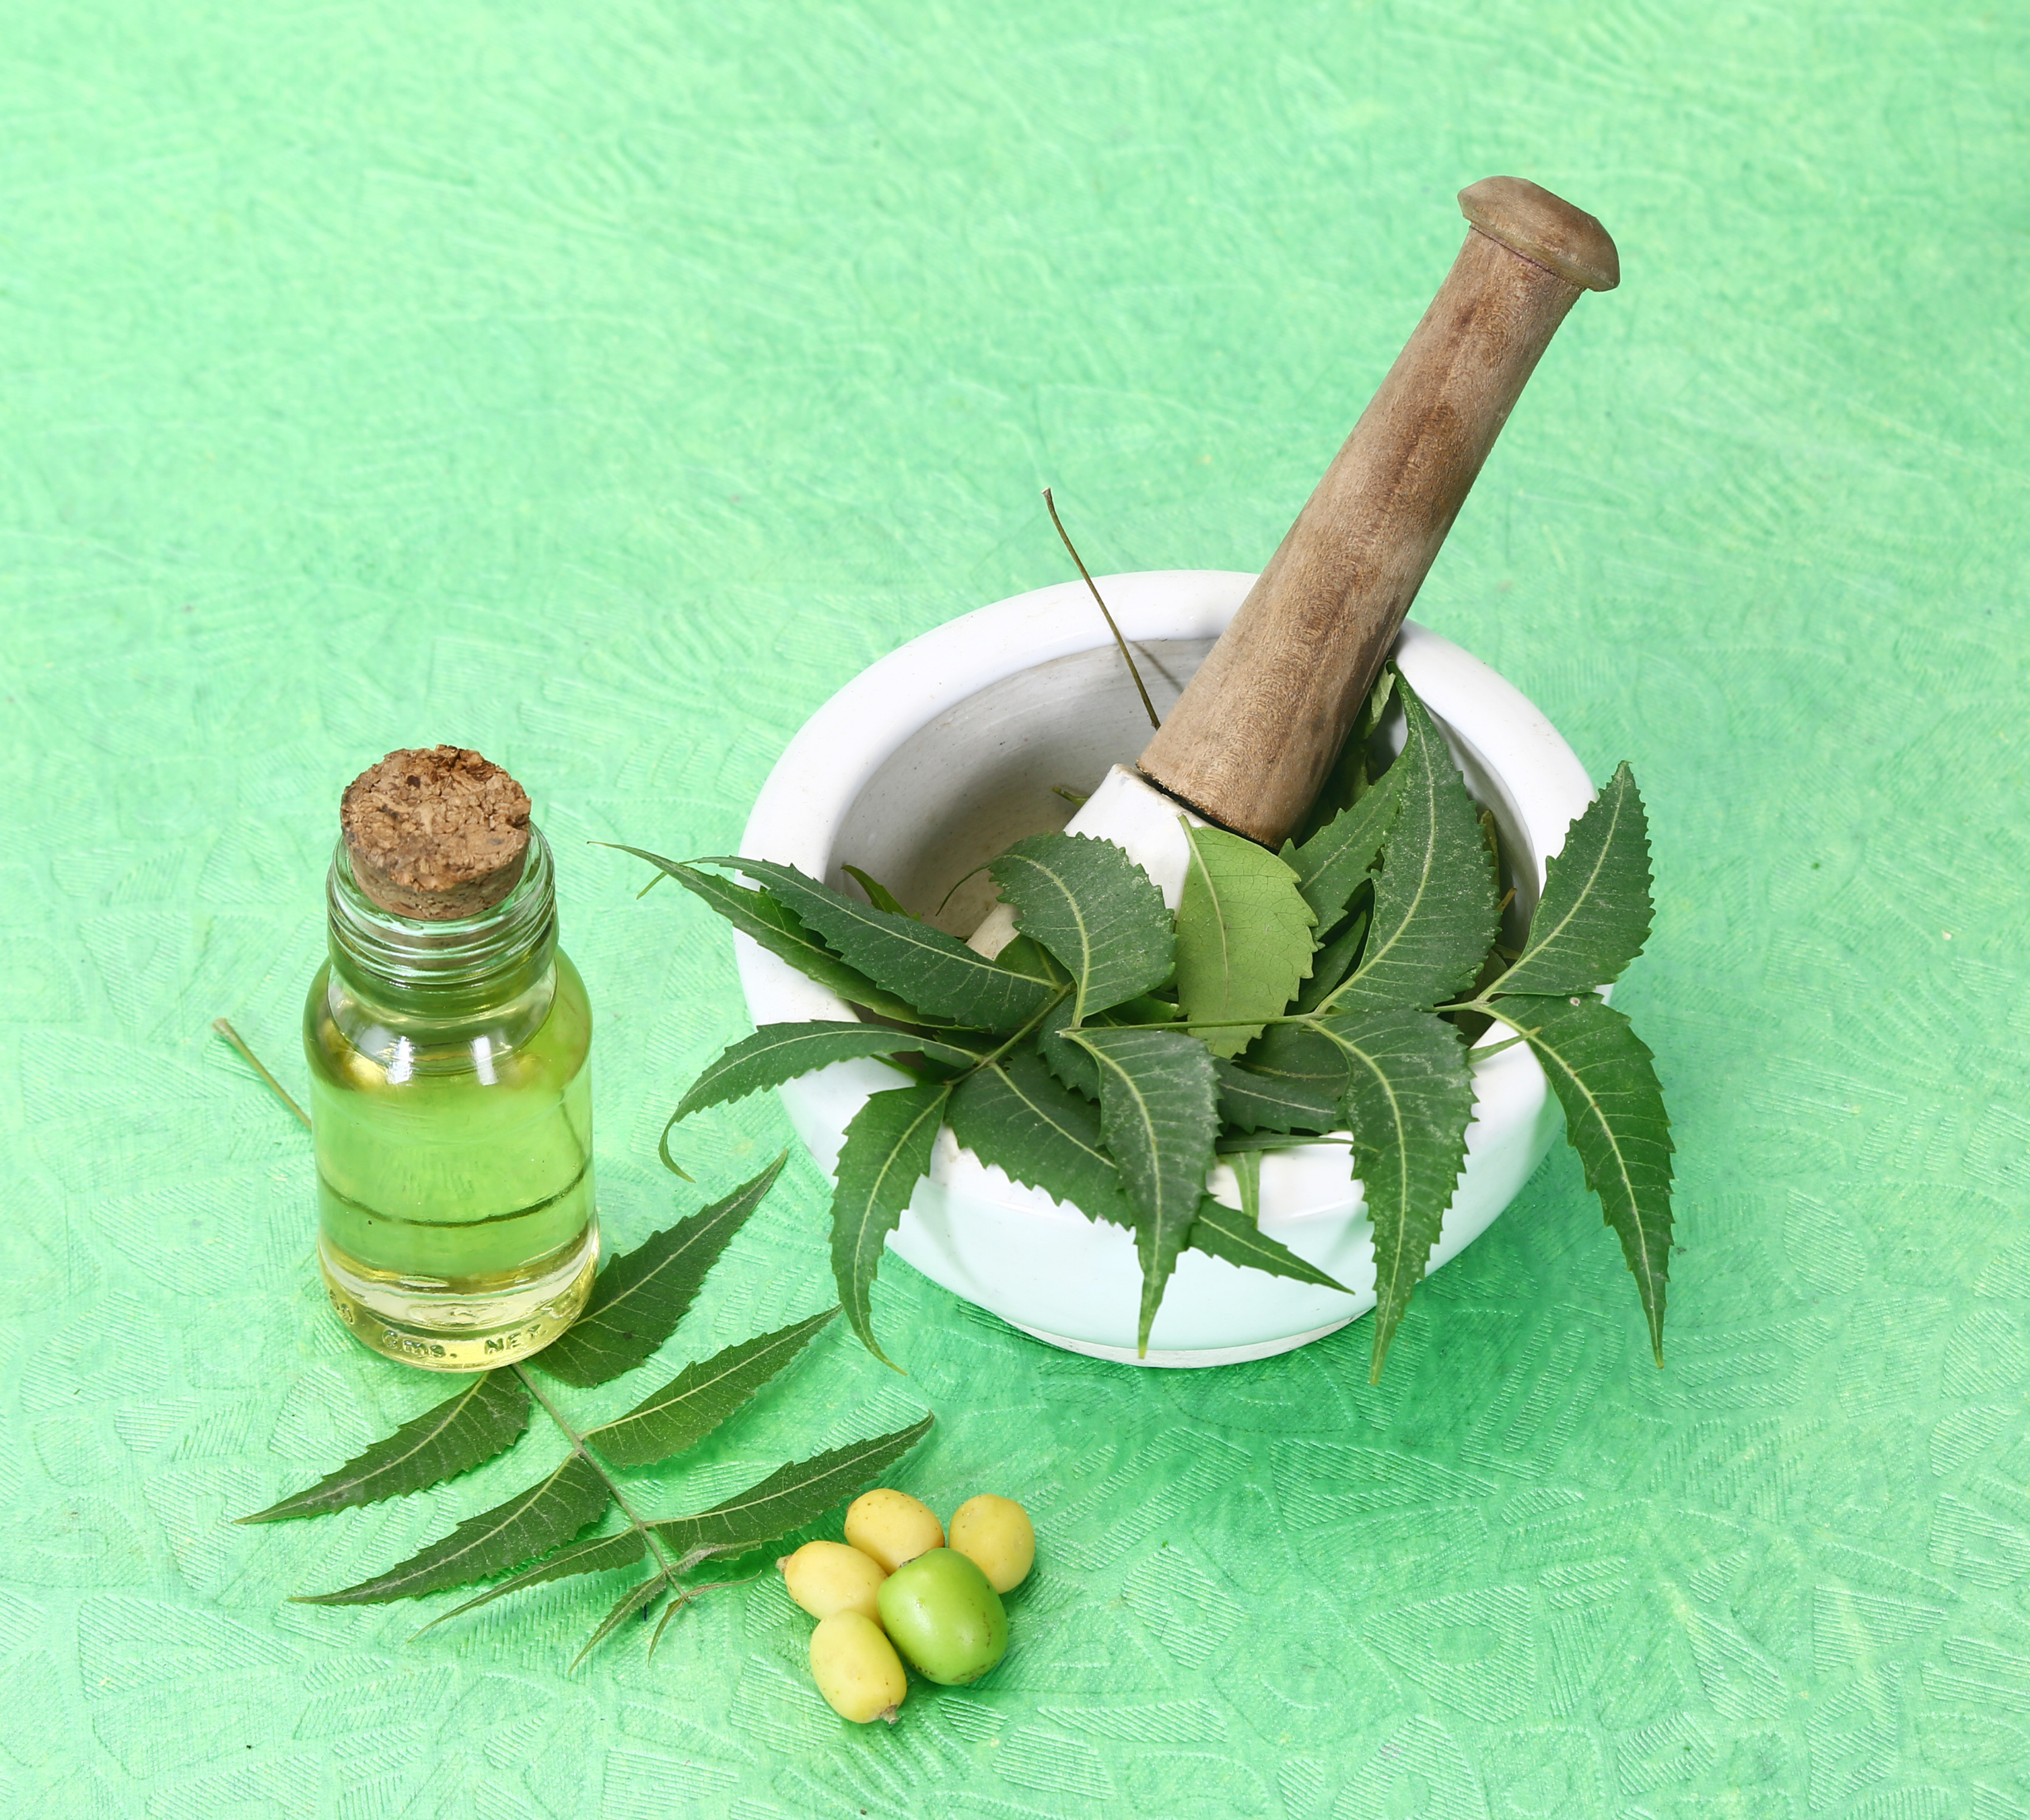 Neem leaves shown in raw and finished form as oil